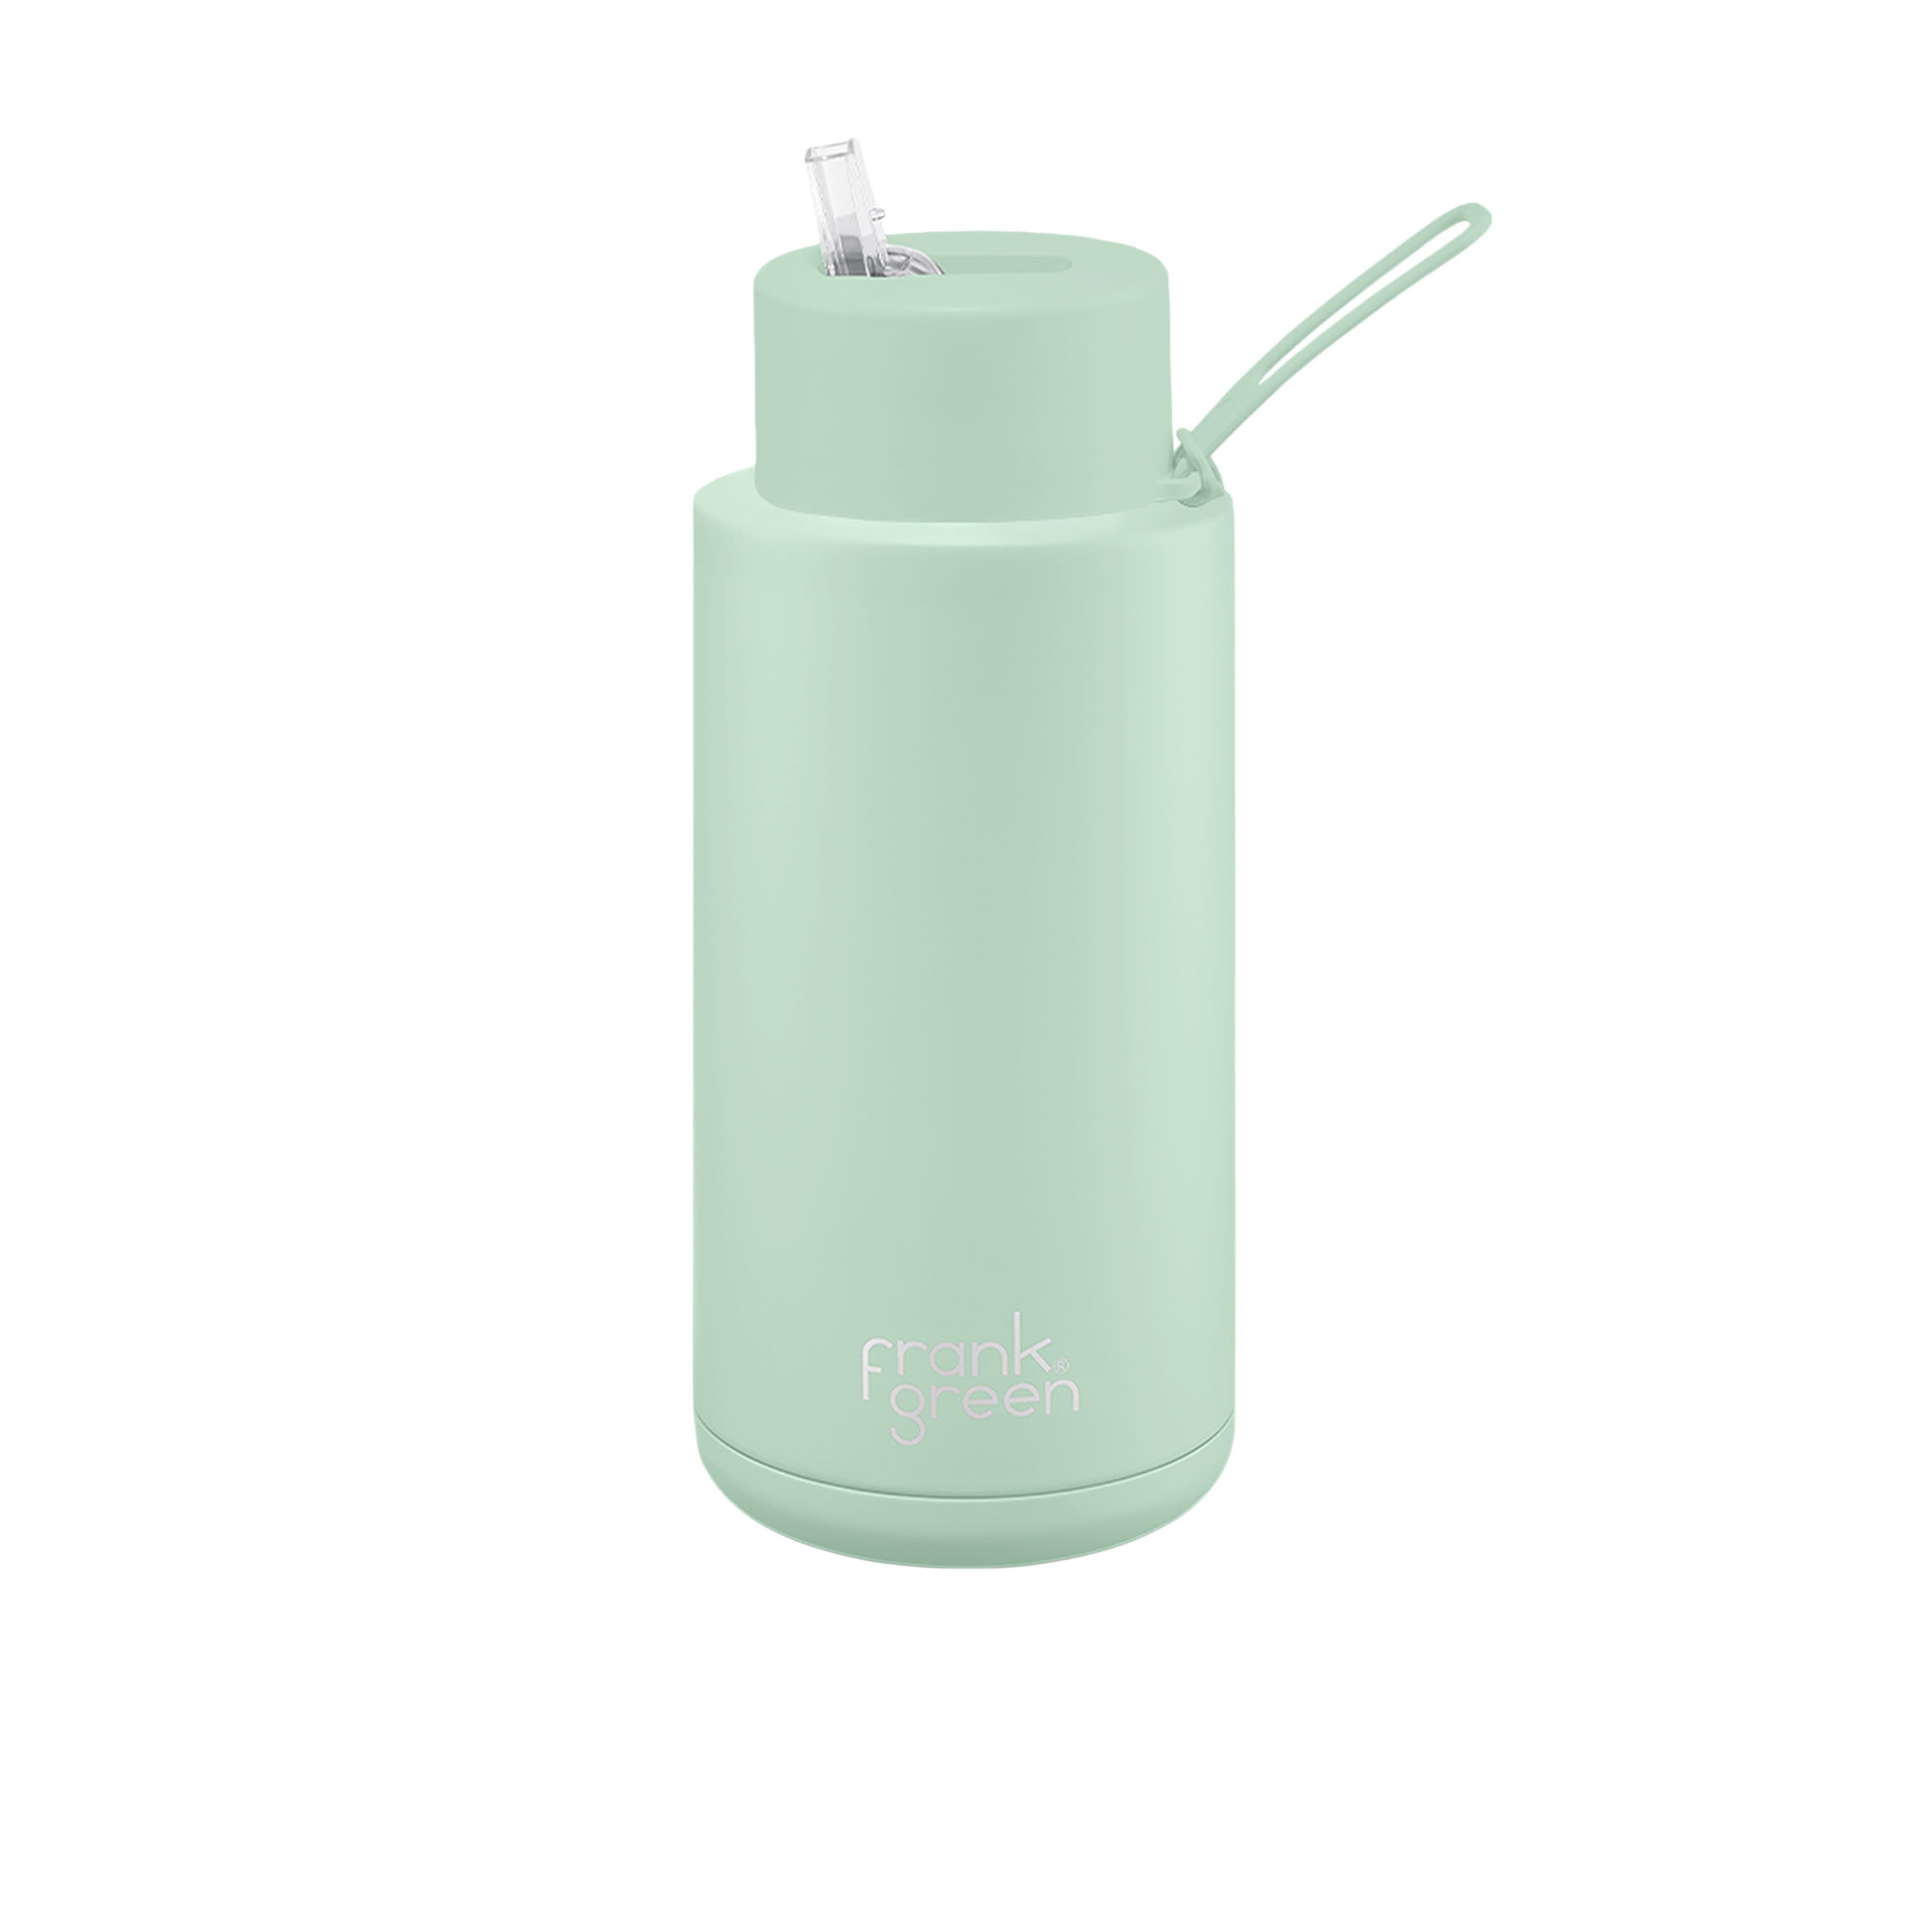 Frank Green Ultimate Ceramic Reusable Bottle with Straw 1L (34oz) Mint Gelato Image 1